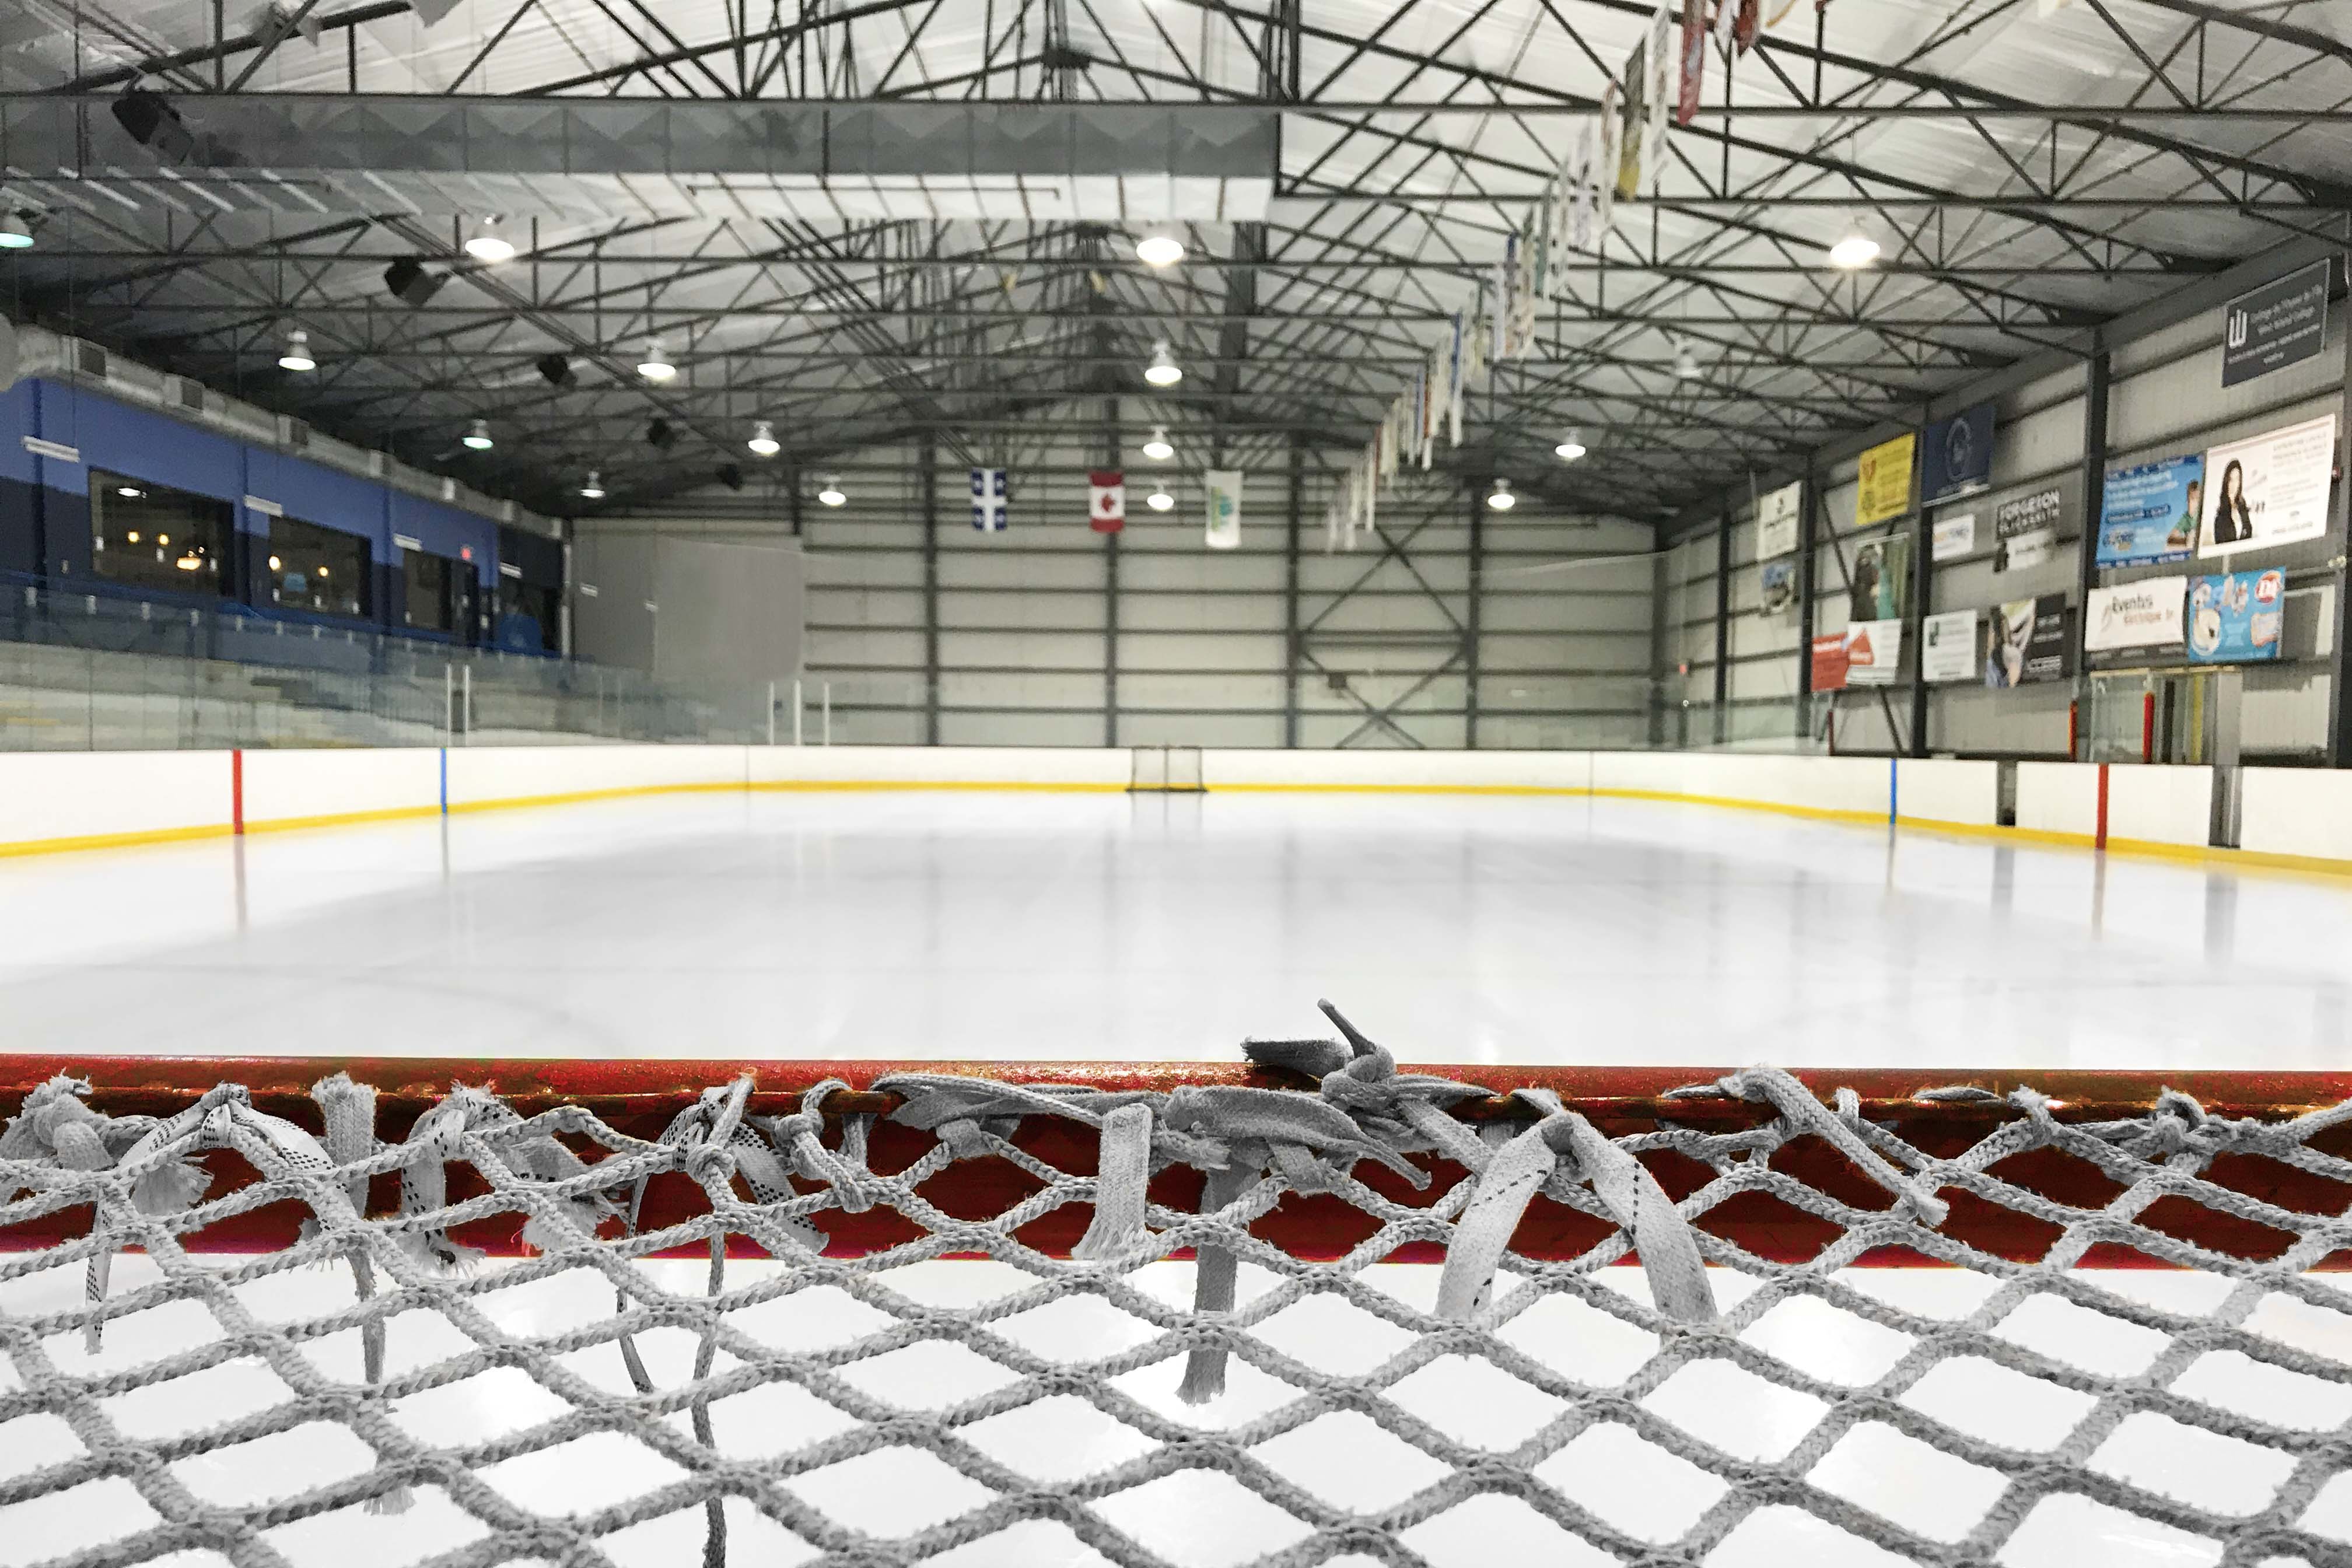 Hockey net with arena in the background.